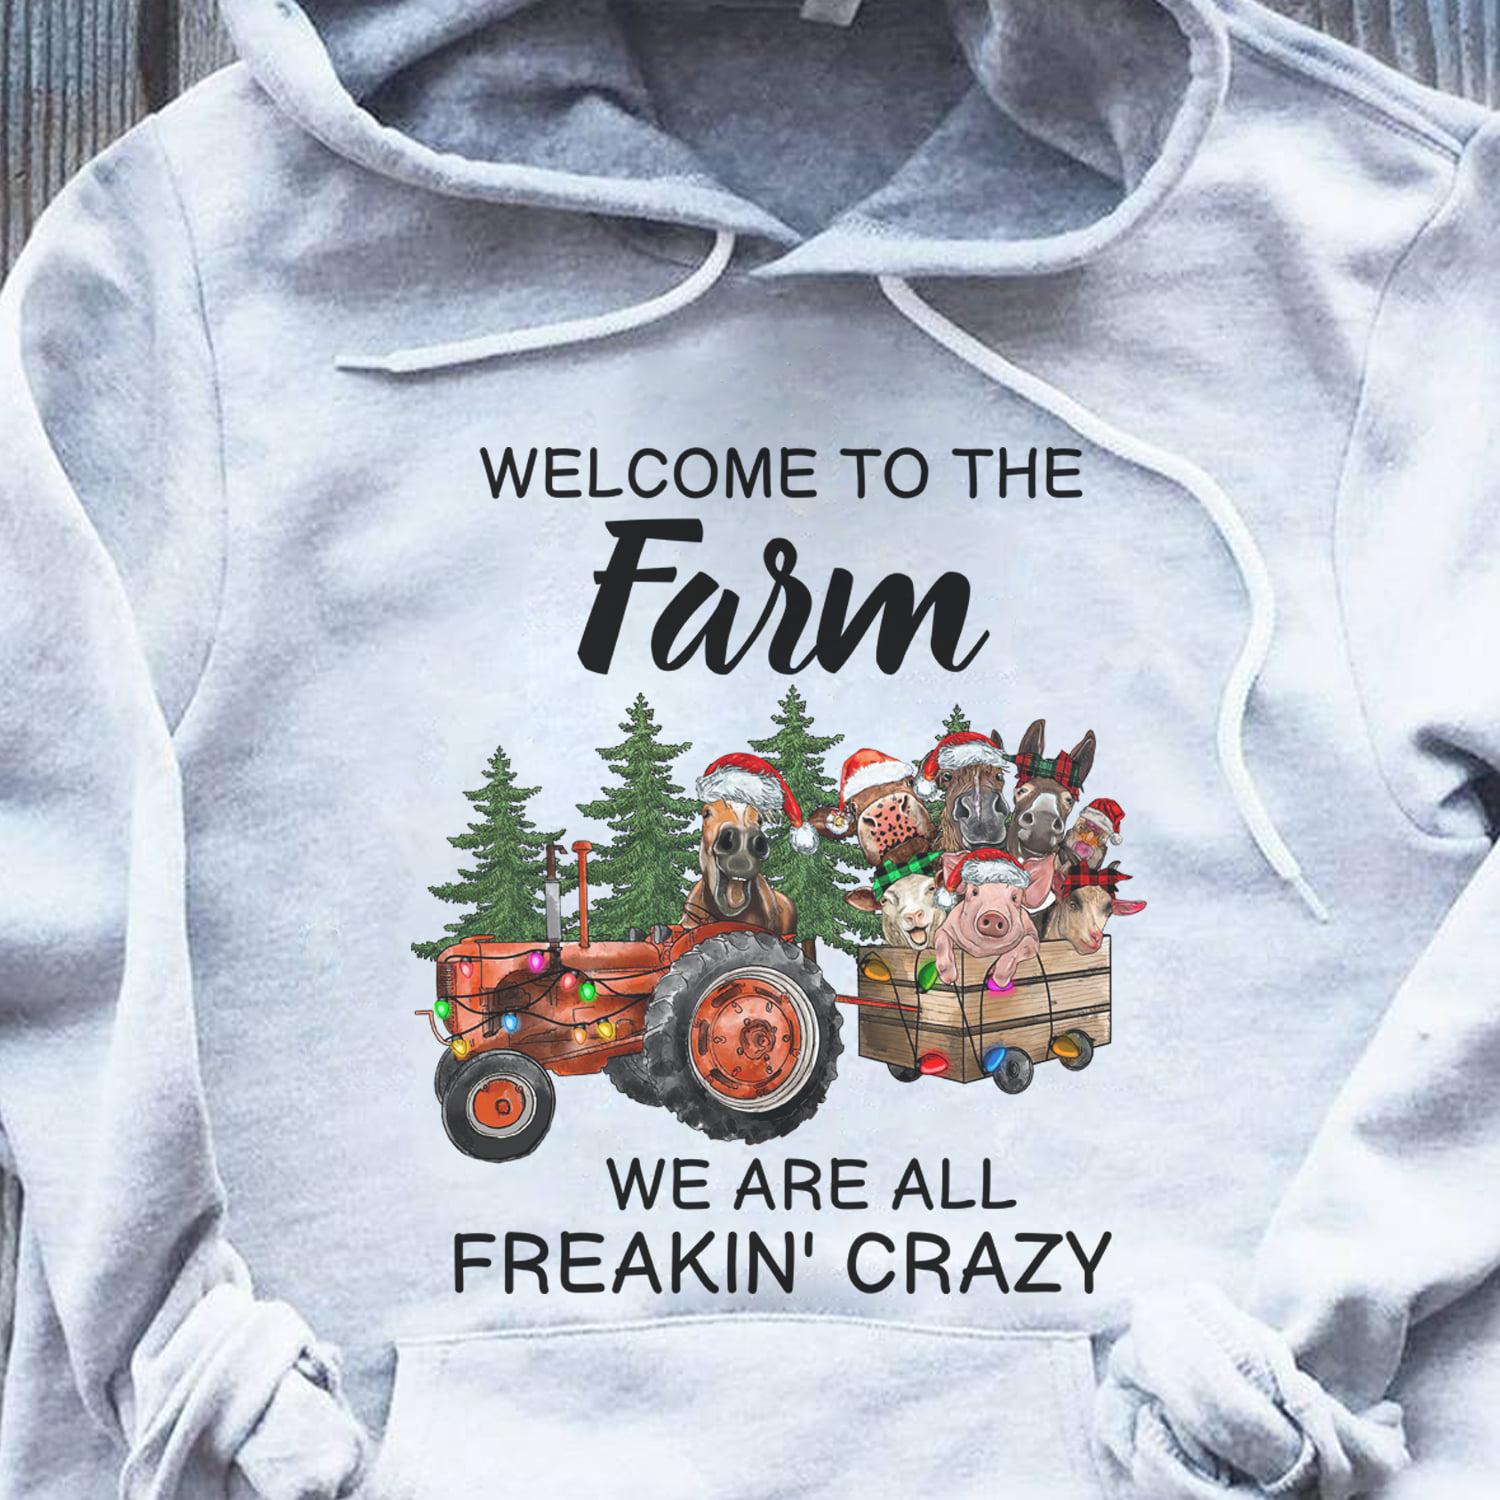 Welcome to the farm we are all freakin crazy - Animal on the farm, Christmas day ugly sweater